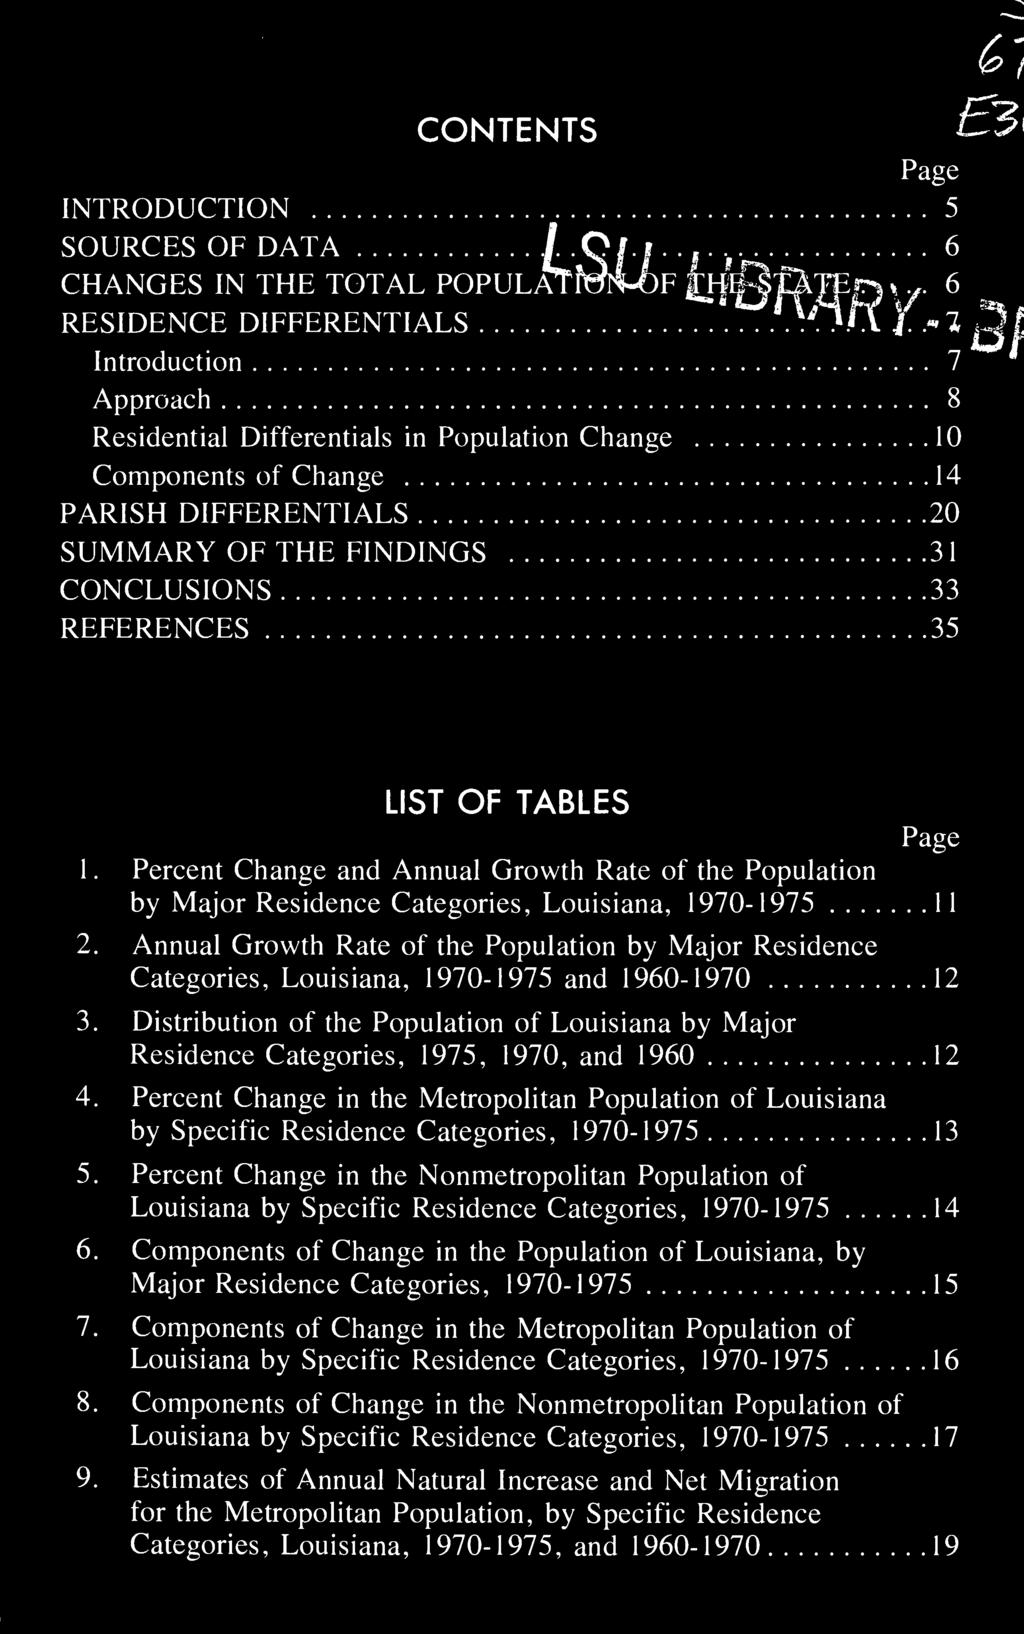 33 REFERENCES 35 J 1. Percent LIST OF TABLES Page Change and Annual Growth Rate of the Population by Major Residence Categories, Louisiana, 1970-1975 11 2.